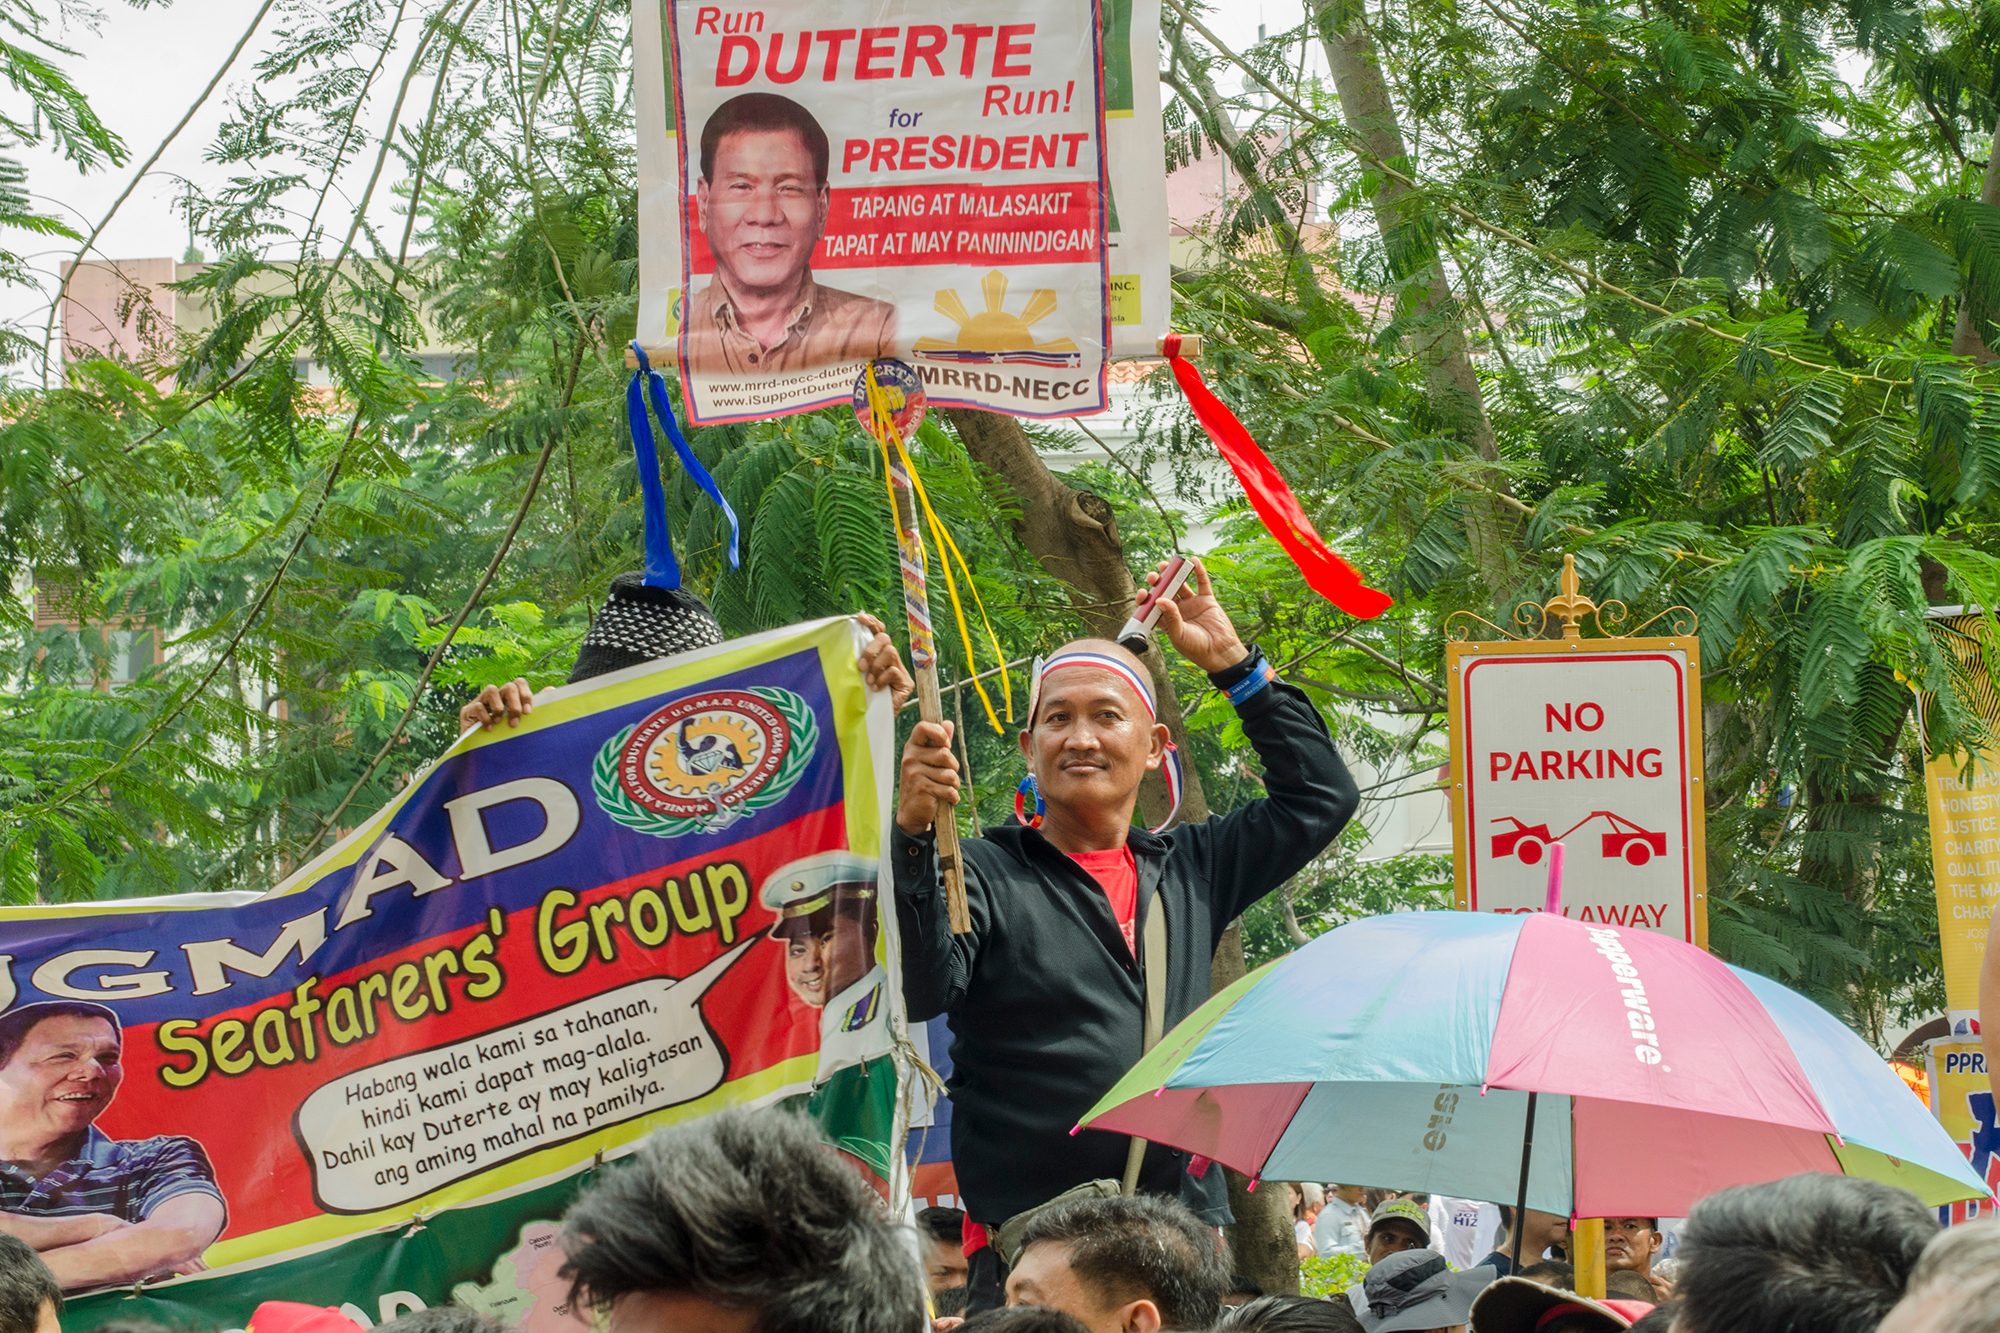 Rodrigo Duterte supporters hoping until the very end